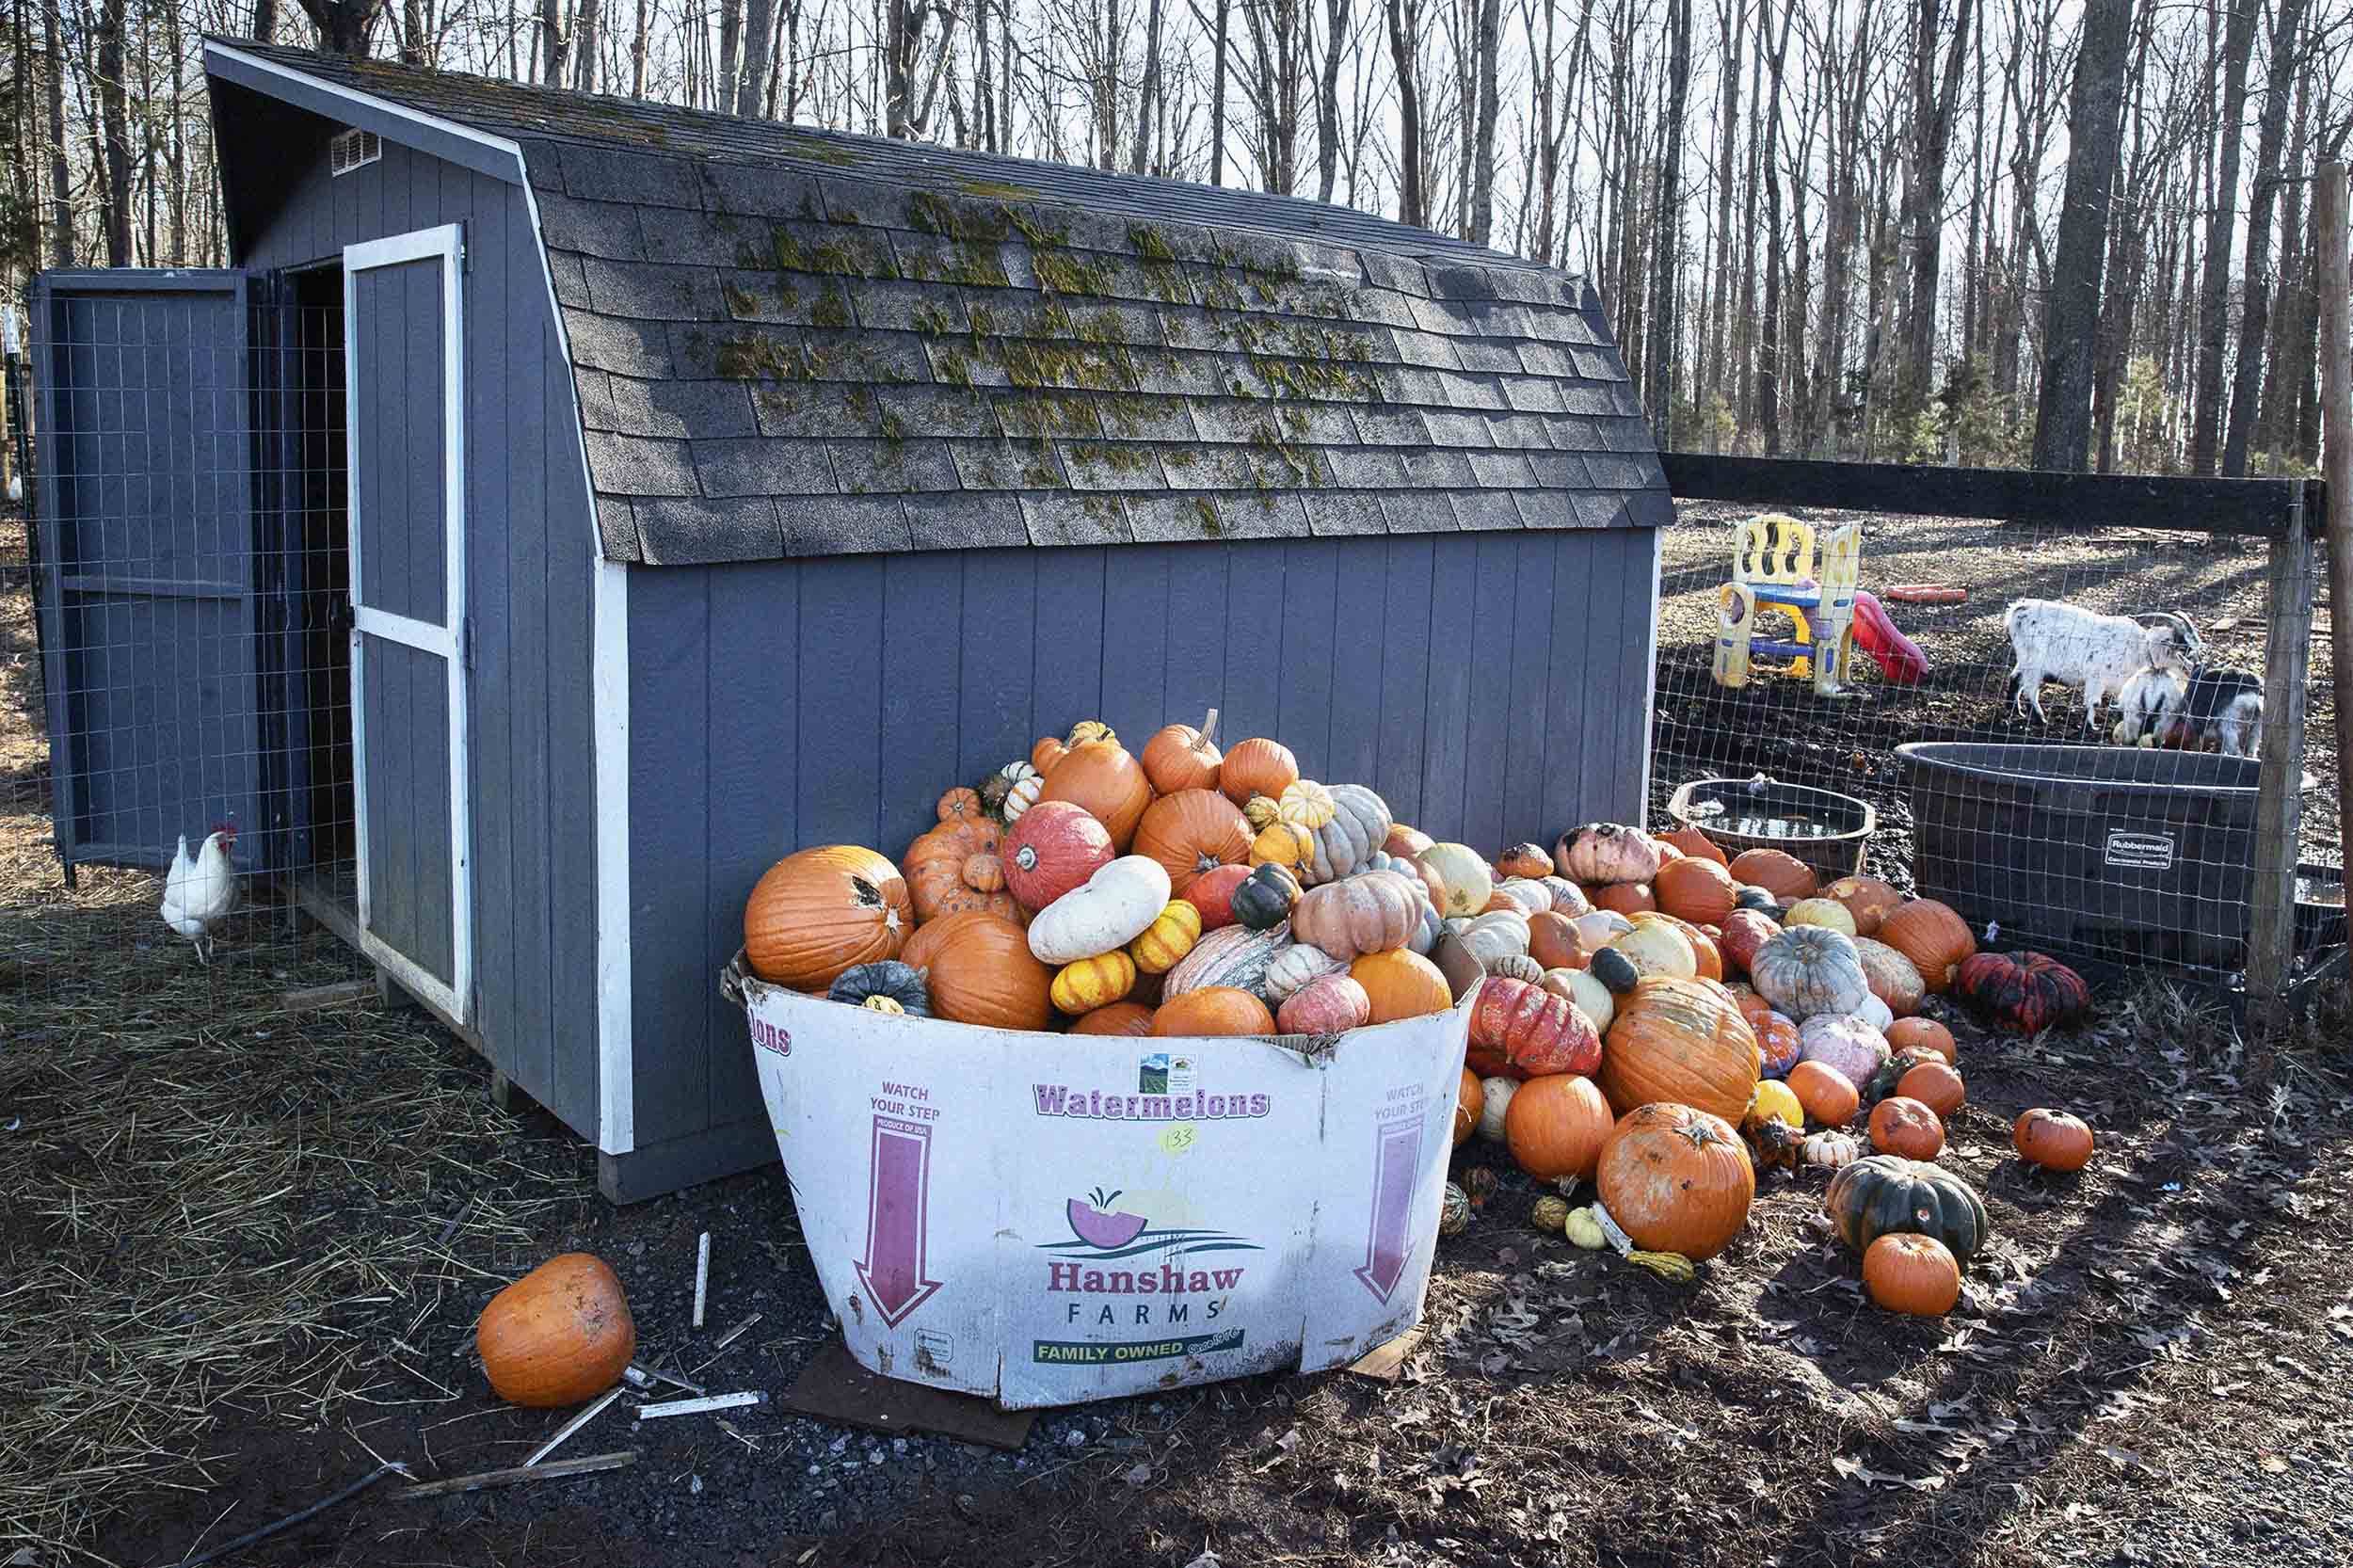 Stack of pumpkins next to a shed and animal pen